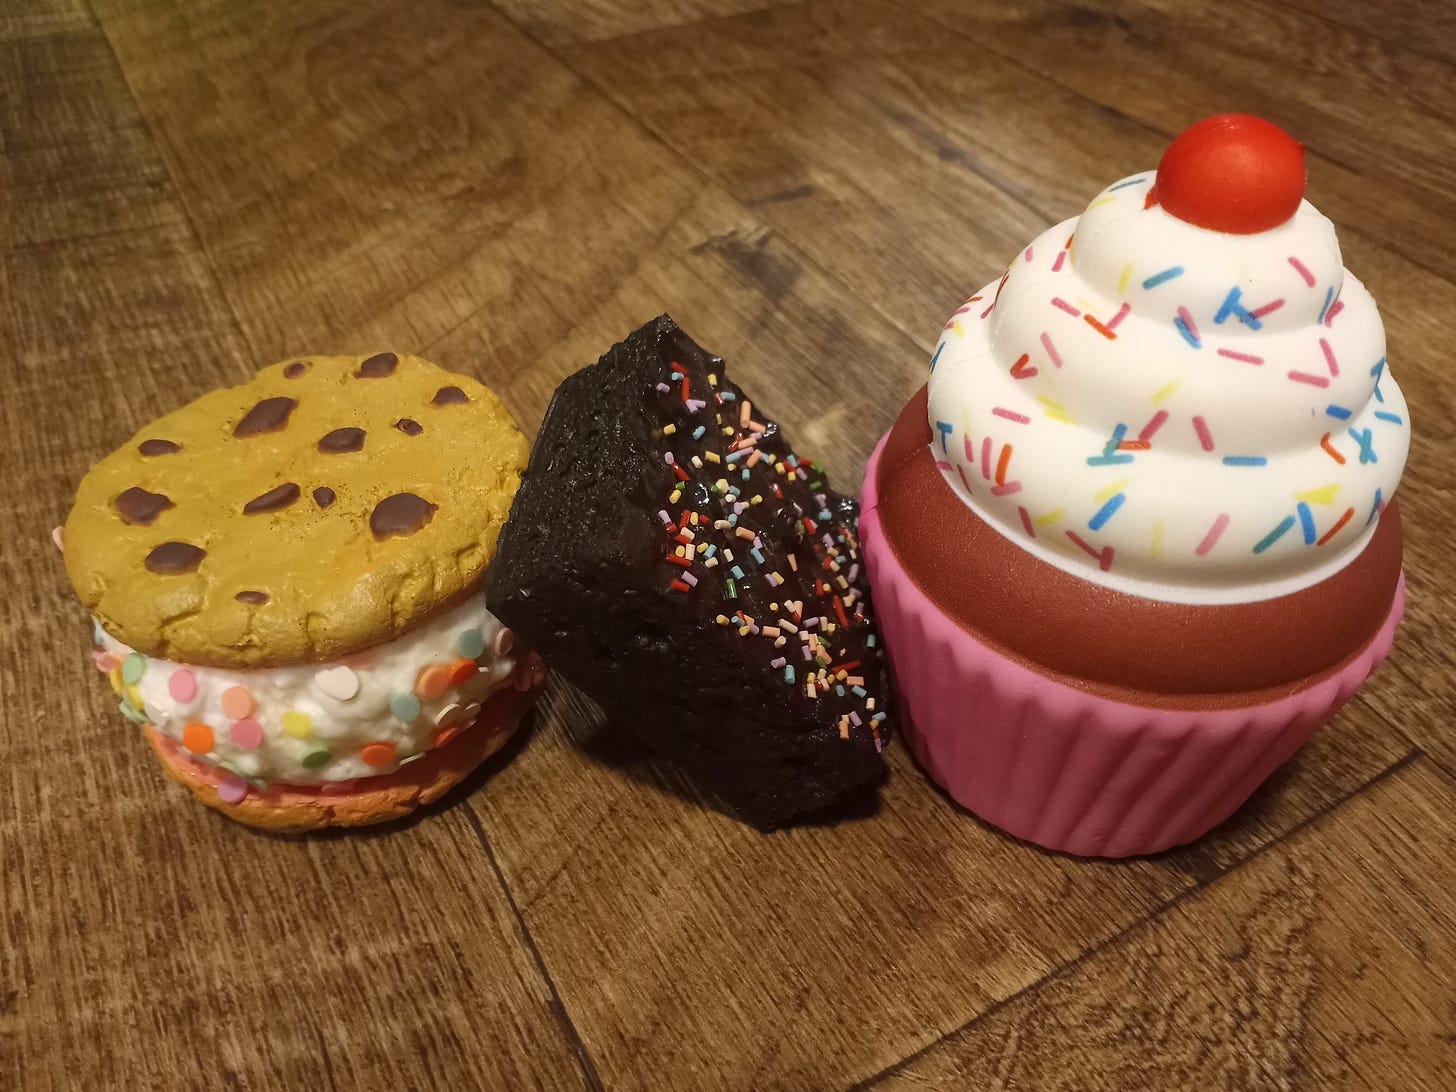 Three realistic dessert-themed squishies, all with rainbow sprinkles. There is a chocolate chip cookie sandwich, a brownie, and a cupcake.